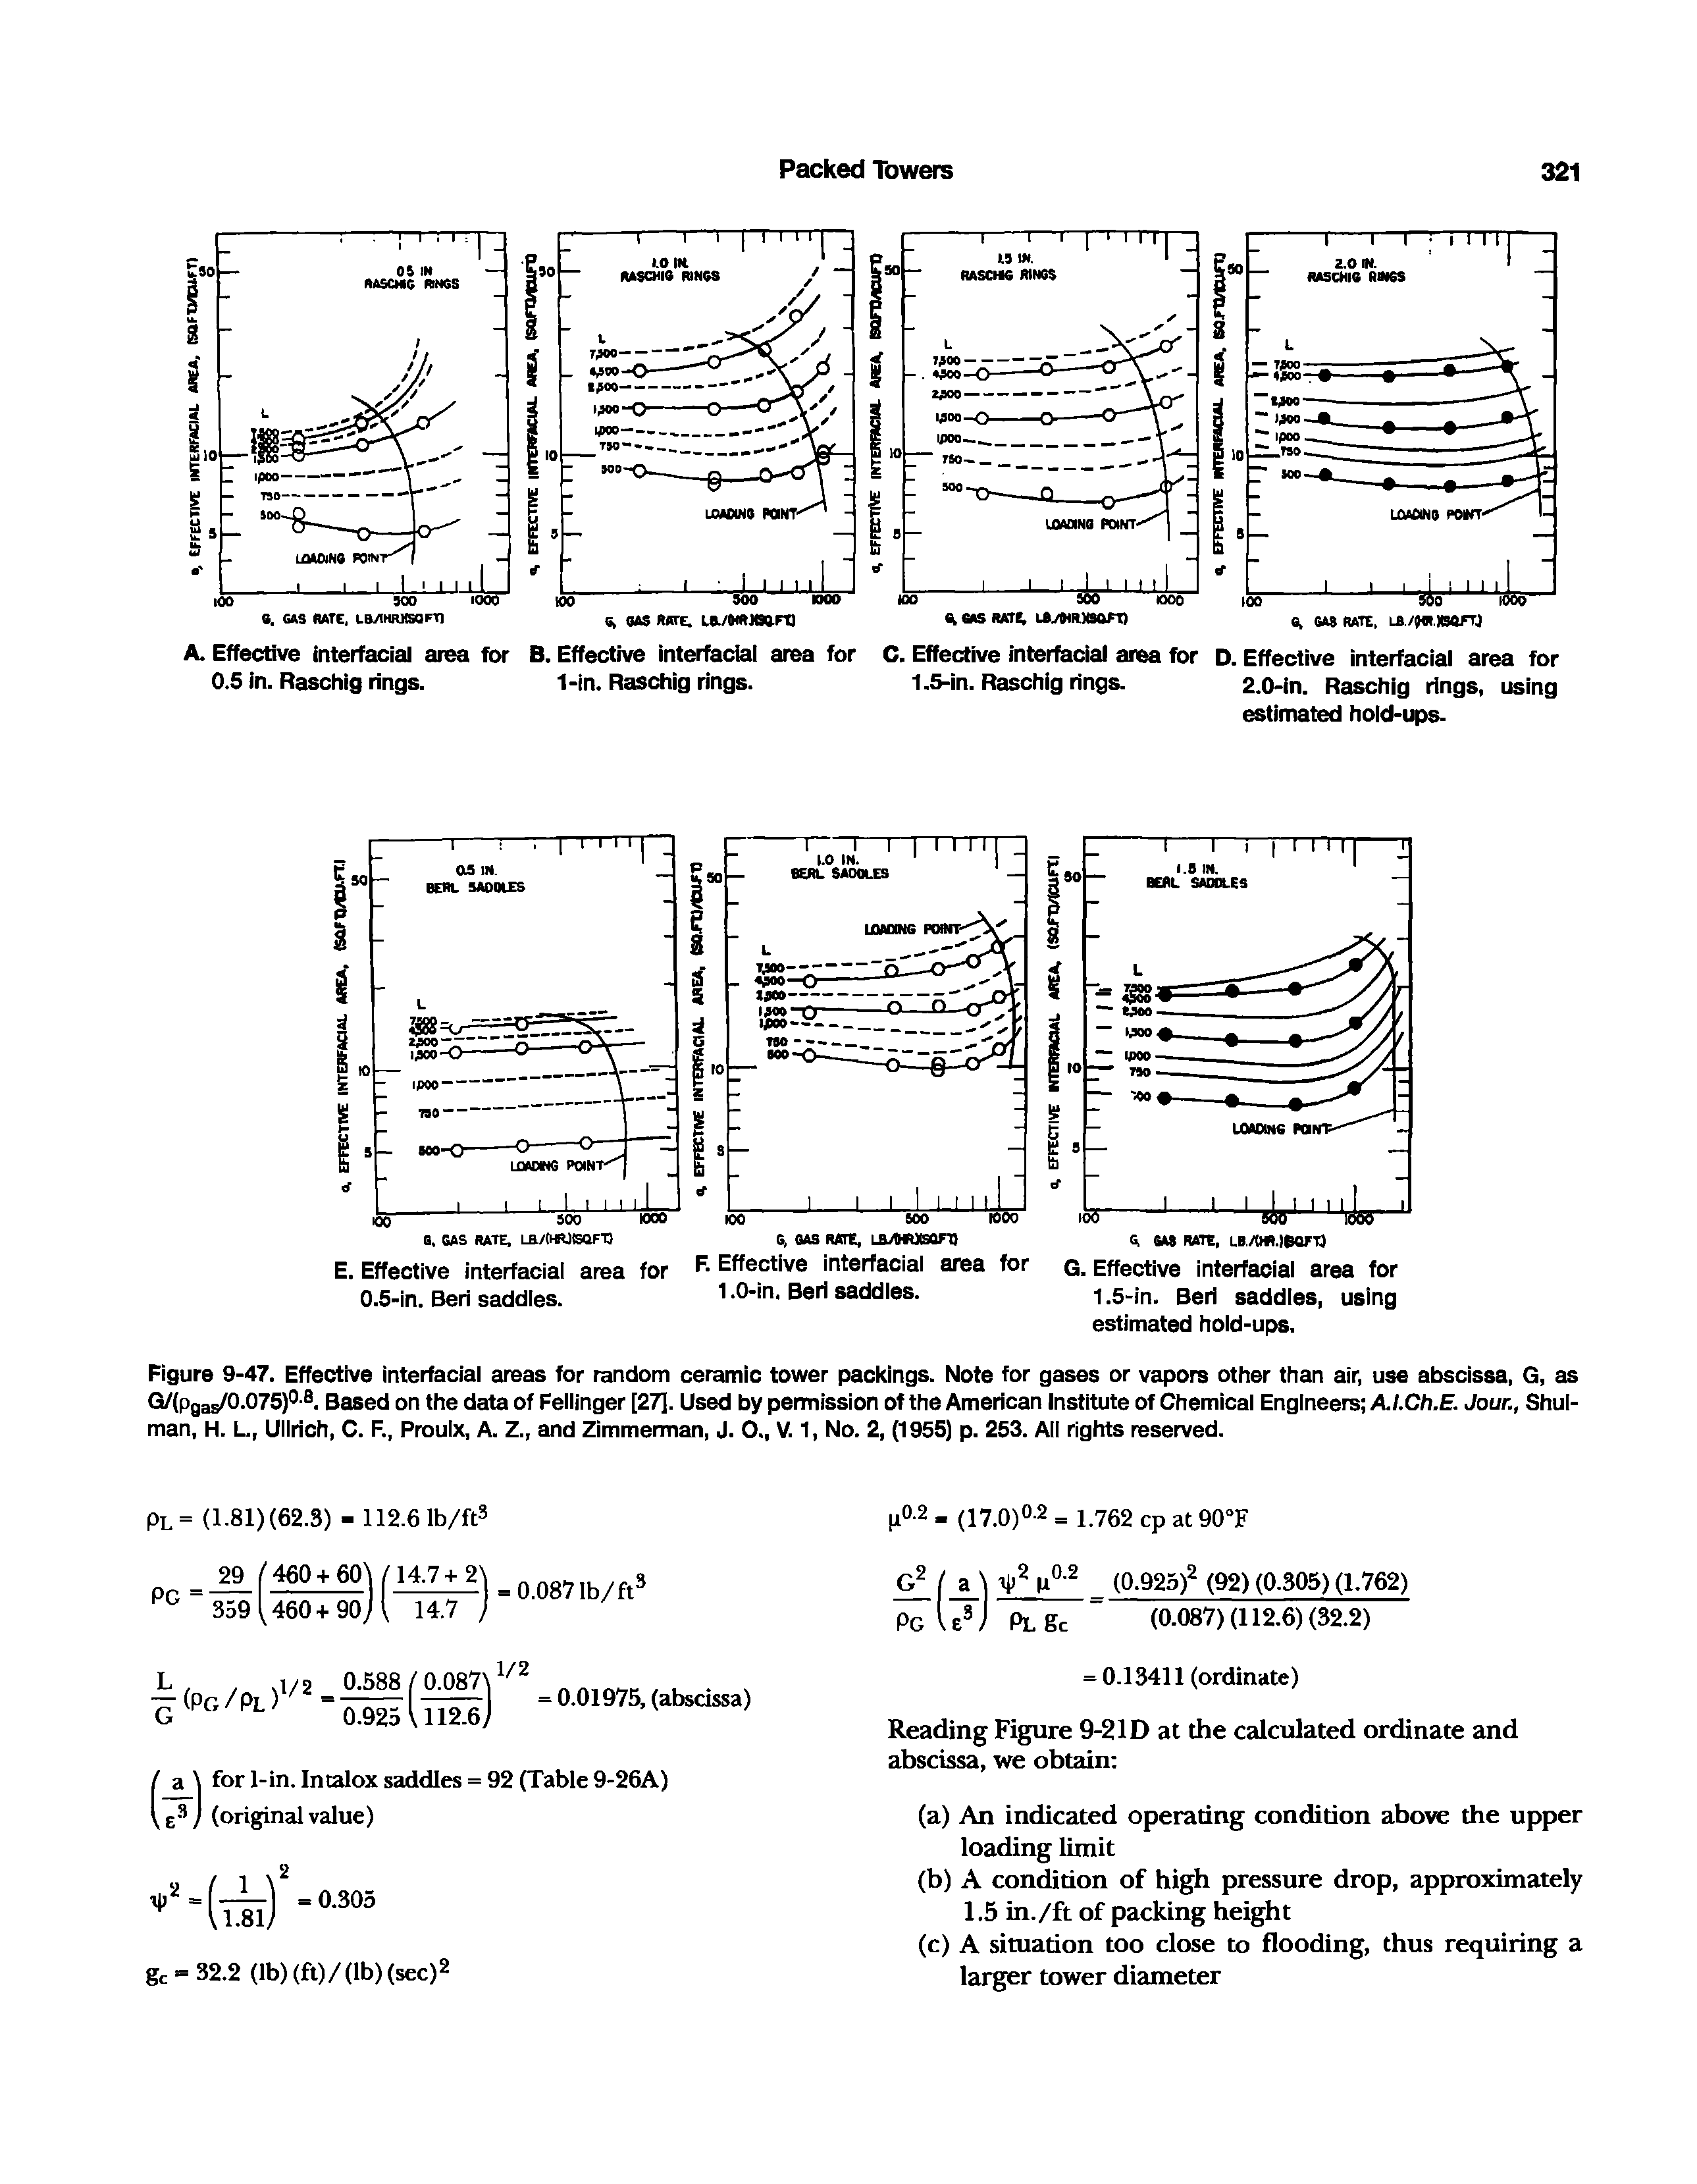 Figure 9-47. Effective interfacial areas for random ceramic tower packings. Note for gases or vapors other than air, use abscissa, G, as G/(pgas/0-075)0 . Based on the data of Fellinger [27]. Used by permission of the American Institute of Chemical Engineers AI.Ch.E. Jour., Shul-man, H. L, Ullrich, C. F., Proulx, A. Z., and Zimmerman, J. O., V. 1, No. 2, (1955) p. 253. All rights reserved.